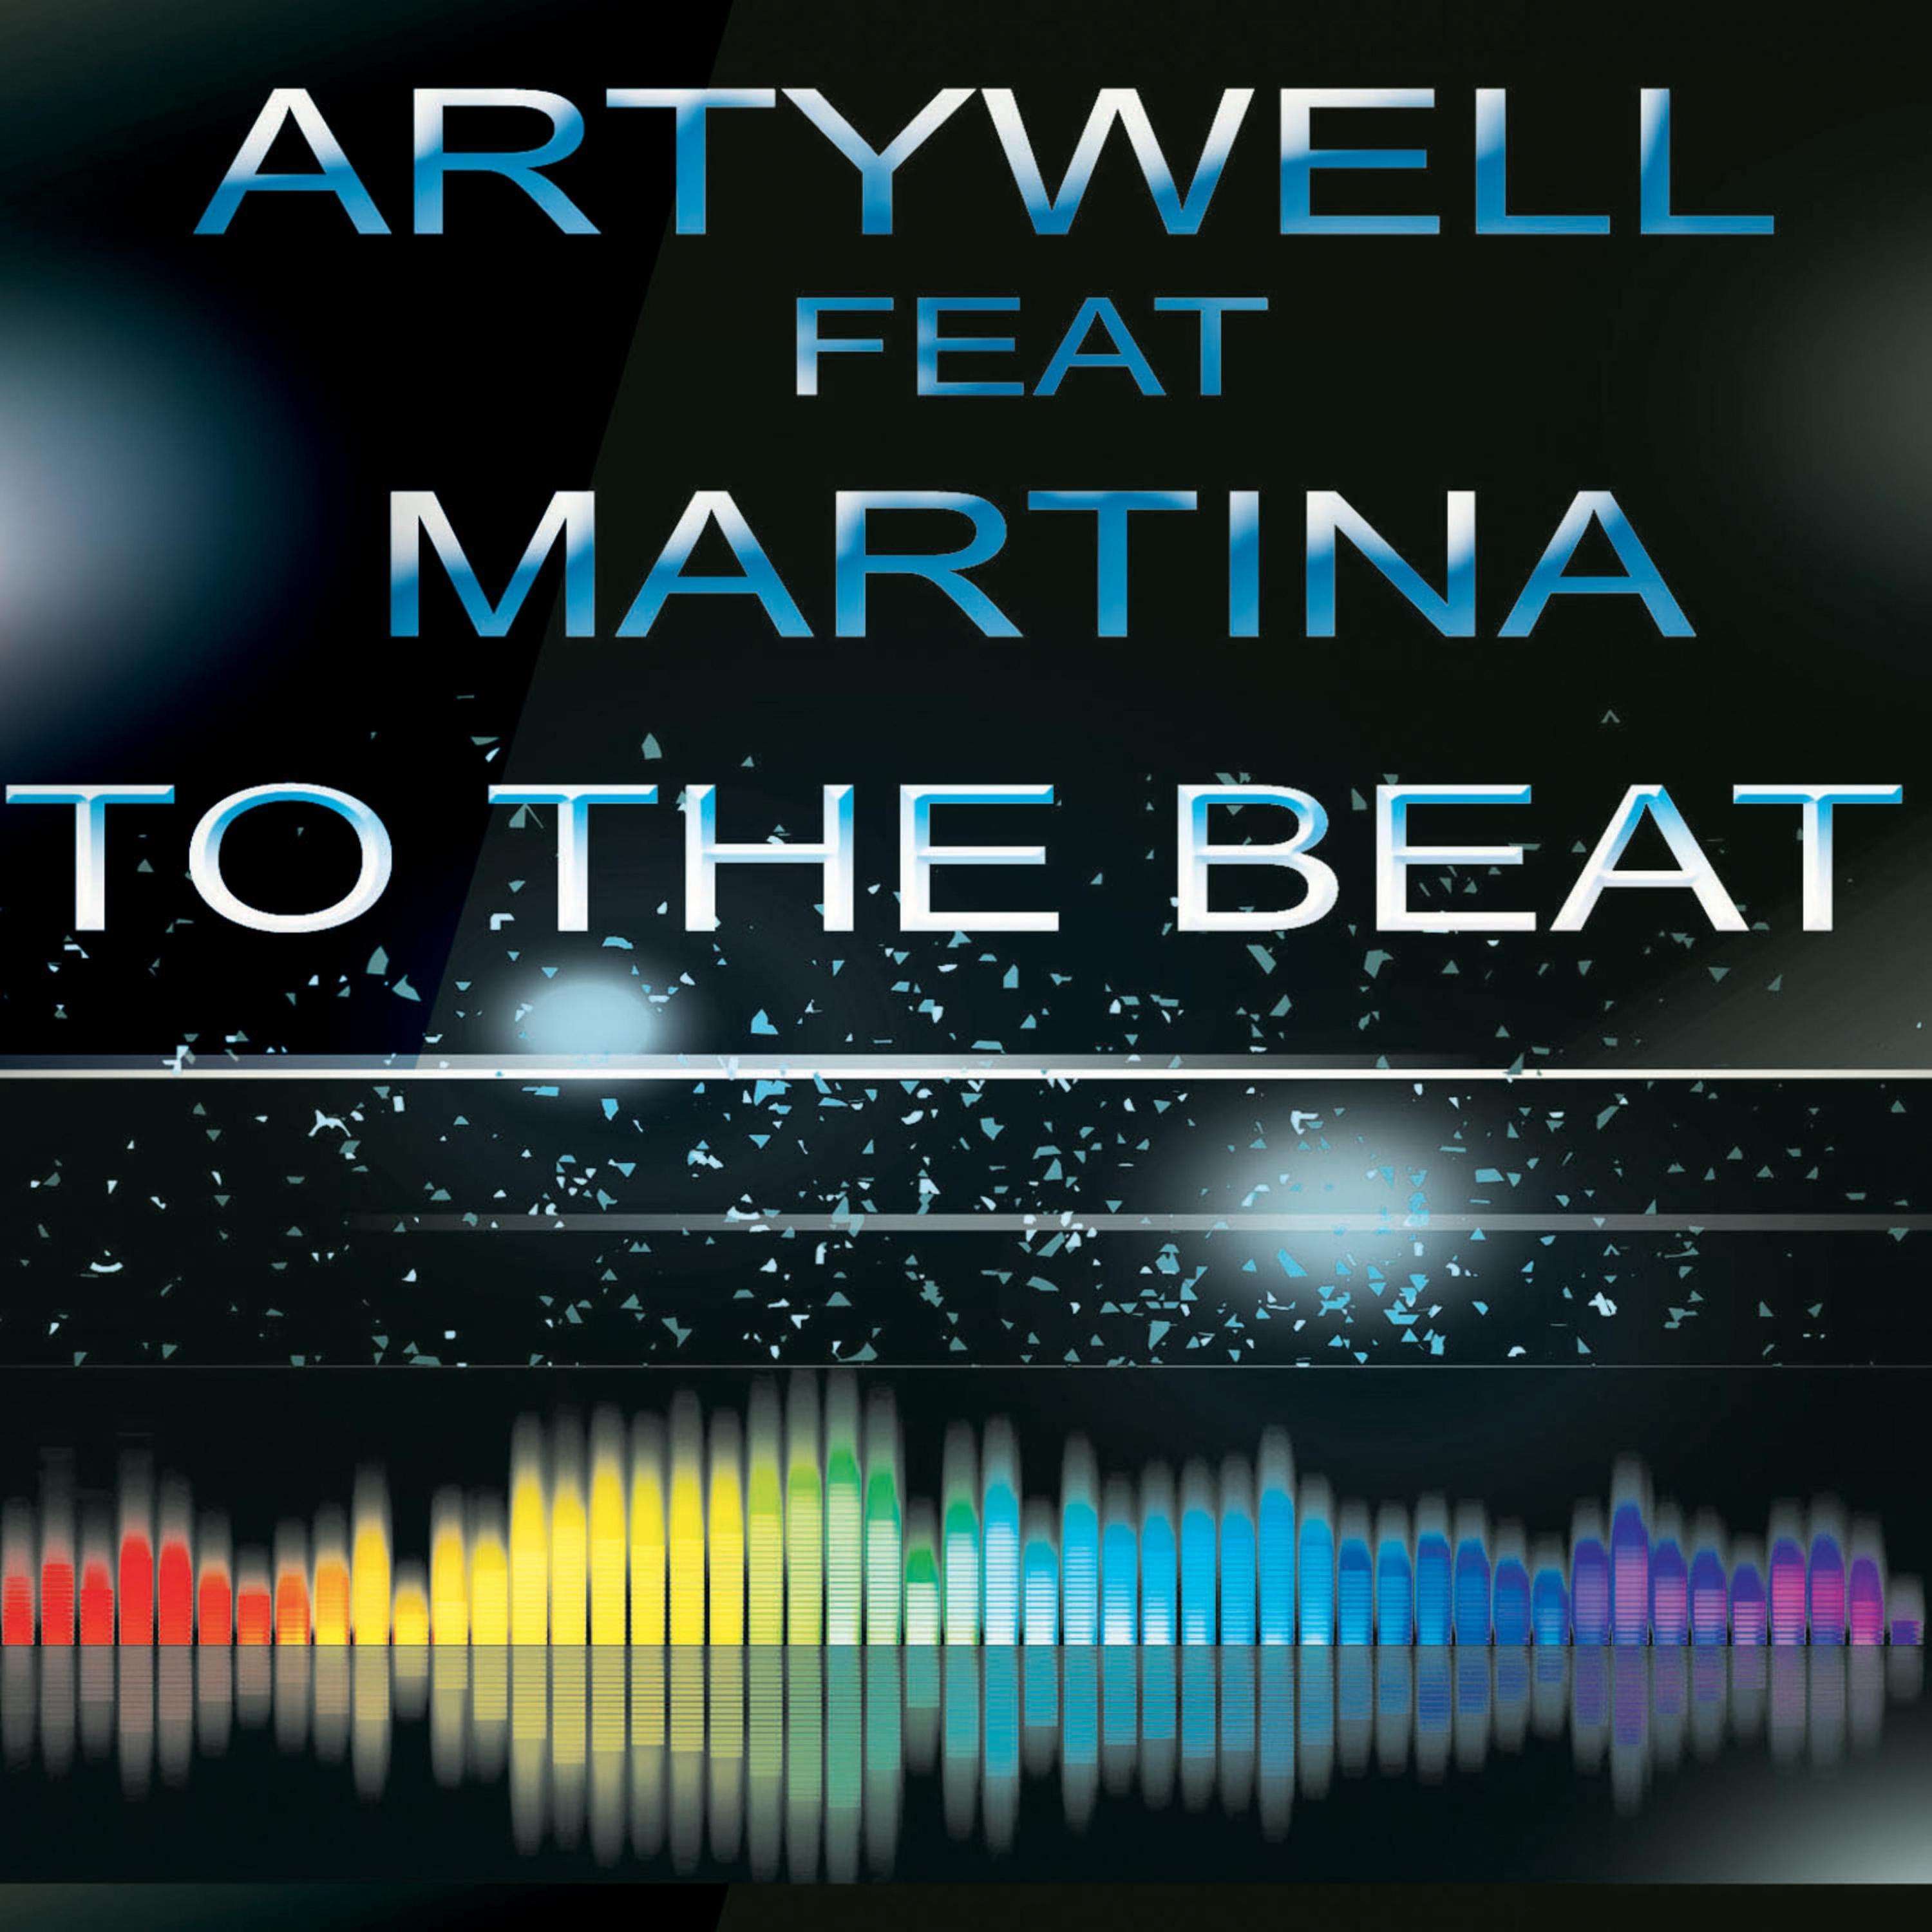 Artywell - To the Beat (Electro Mix)